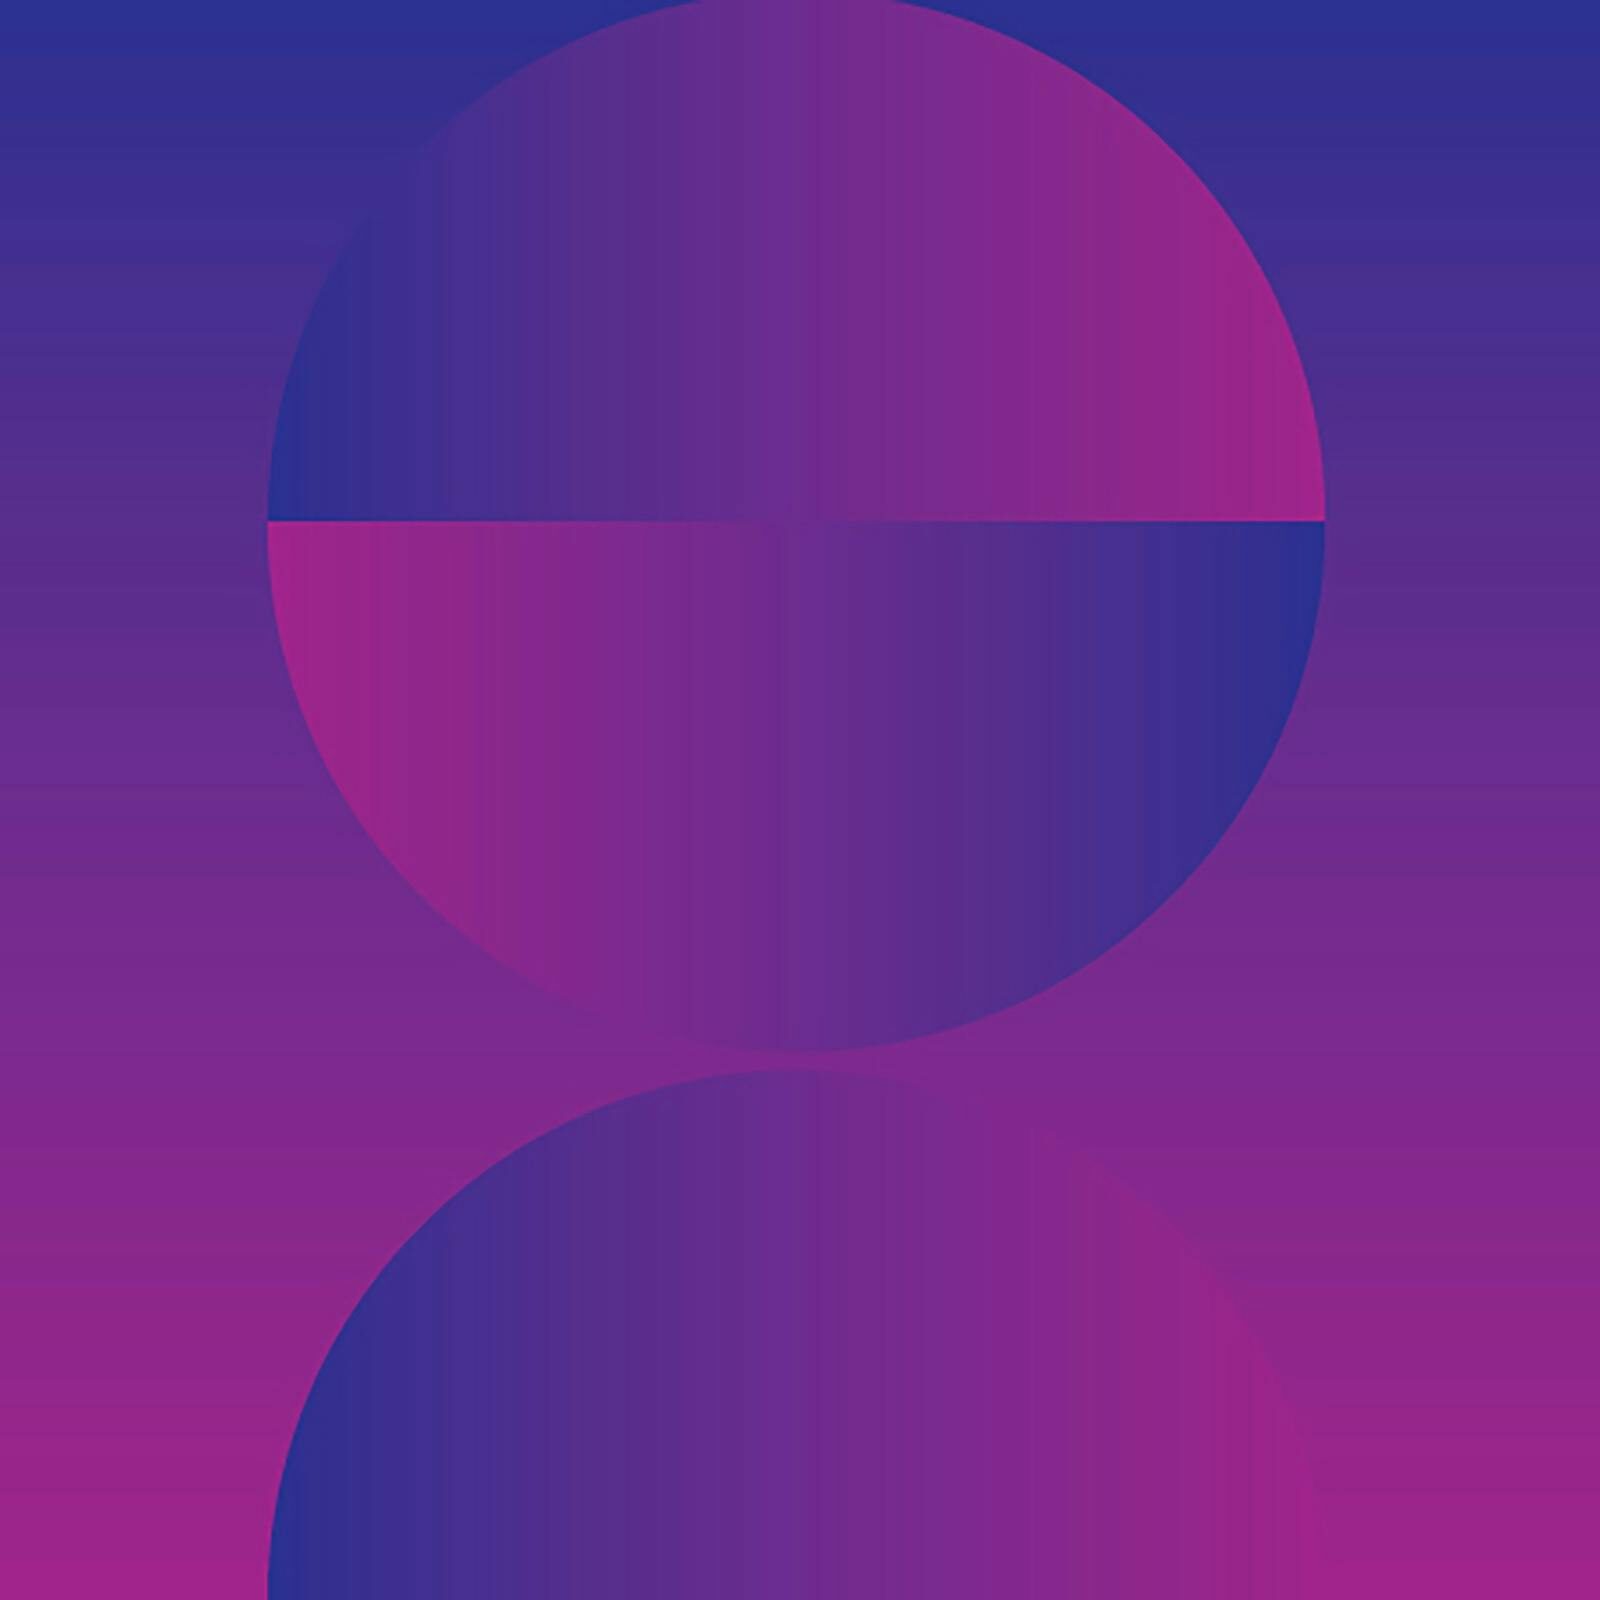 A dark purple and mauve coloured graphic made up of semi-circles which create spherical objects